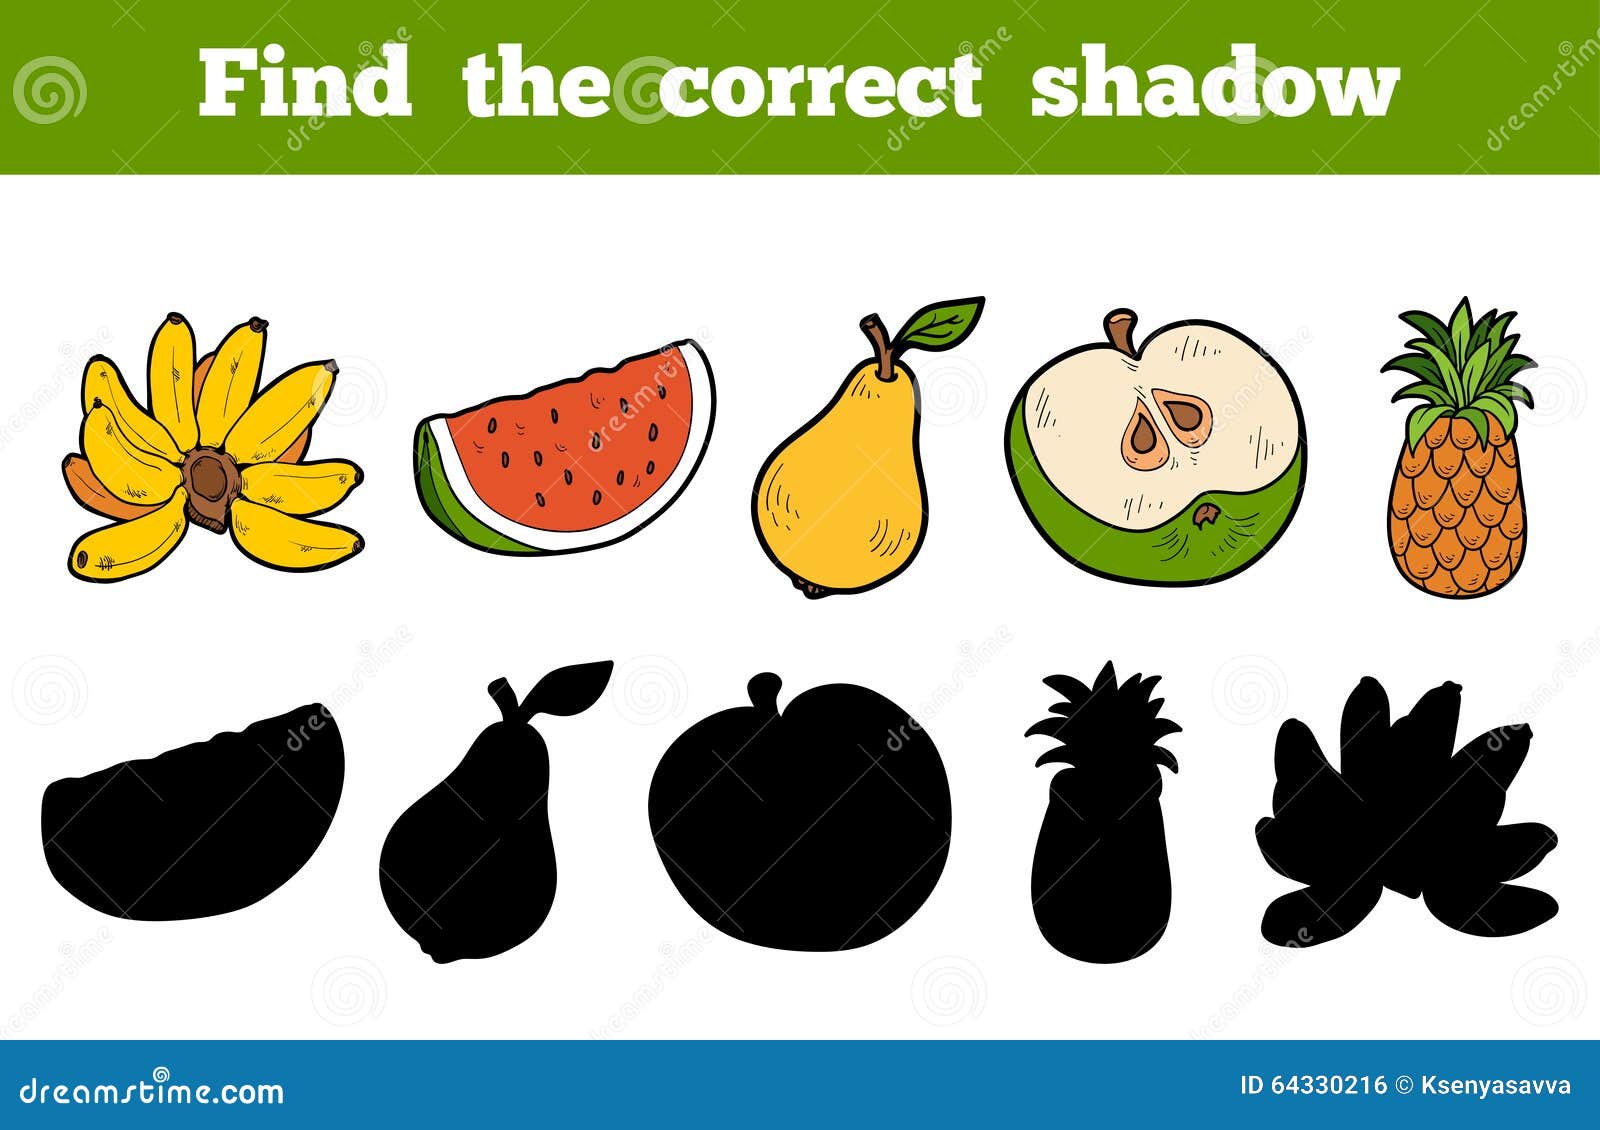 find the correct shadow (fruits)